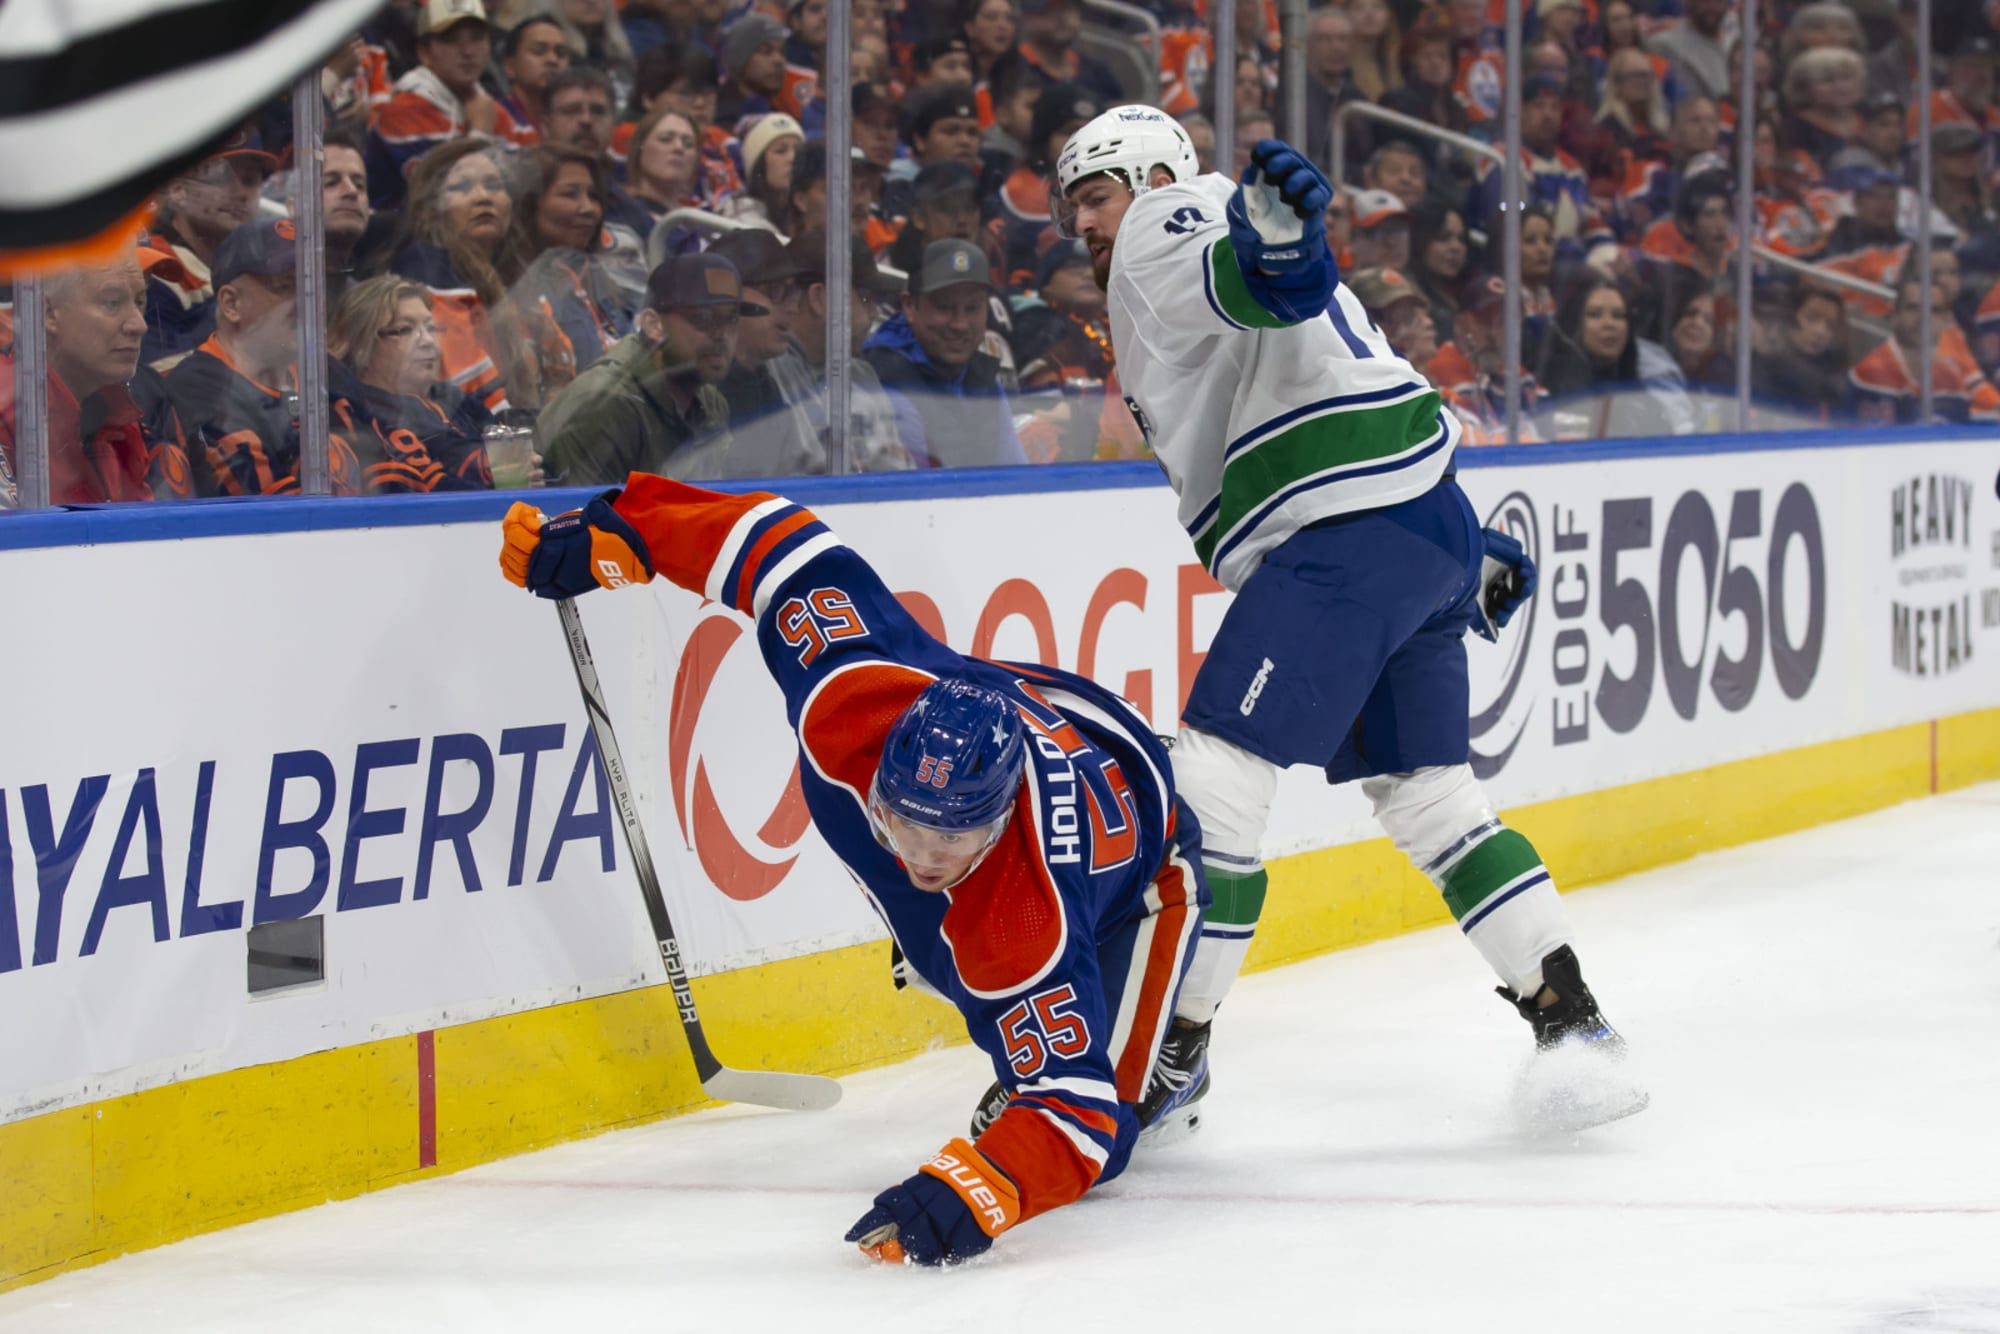 Oilers: Ekholm, Holloway expected to play in rematch with Canucks